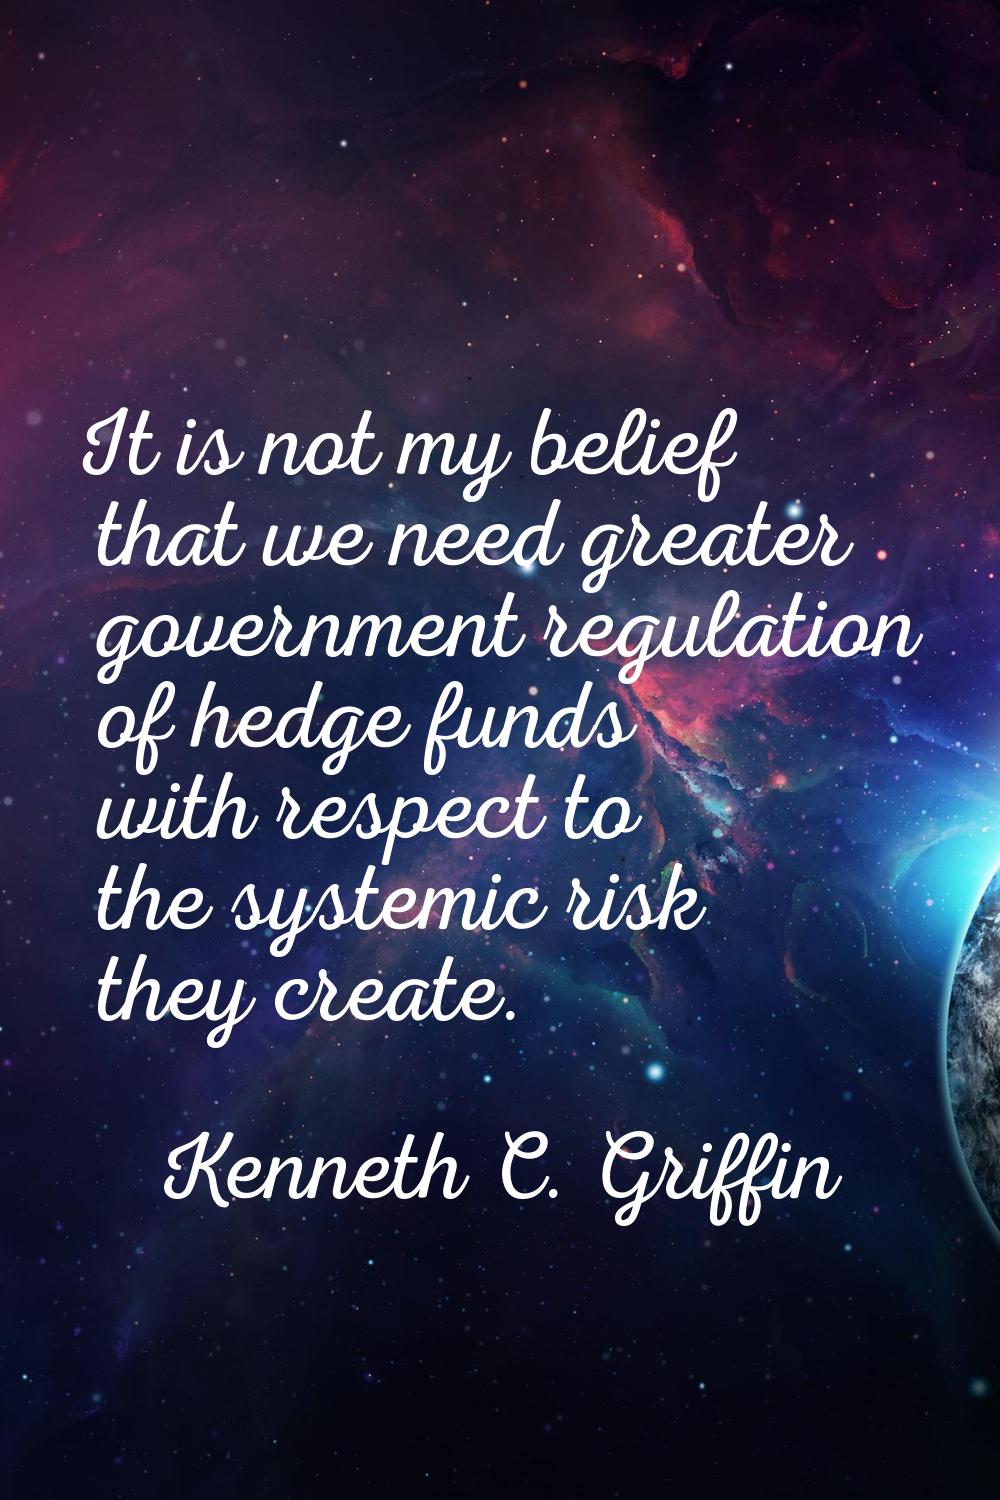 It is not my belief that we need greater government regulation of hedge funds with respect to the s